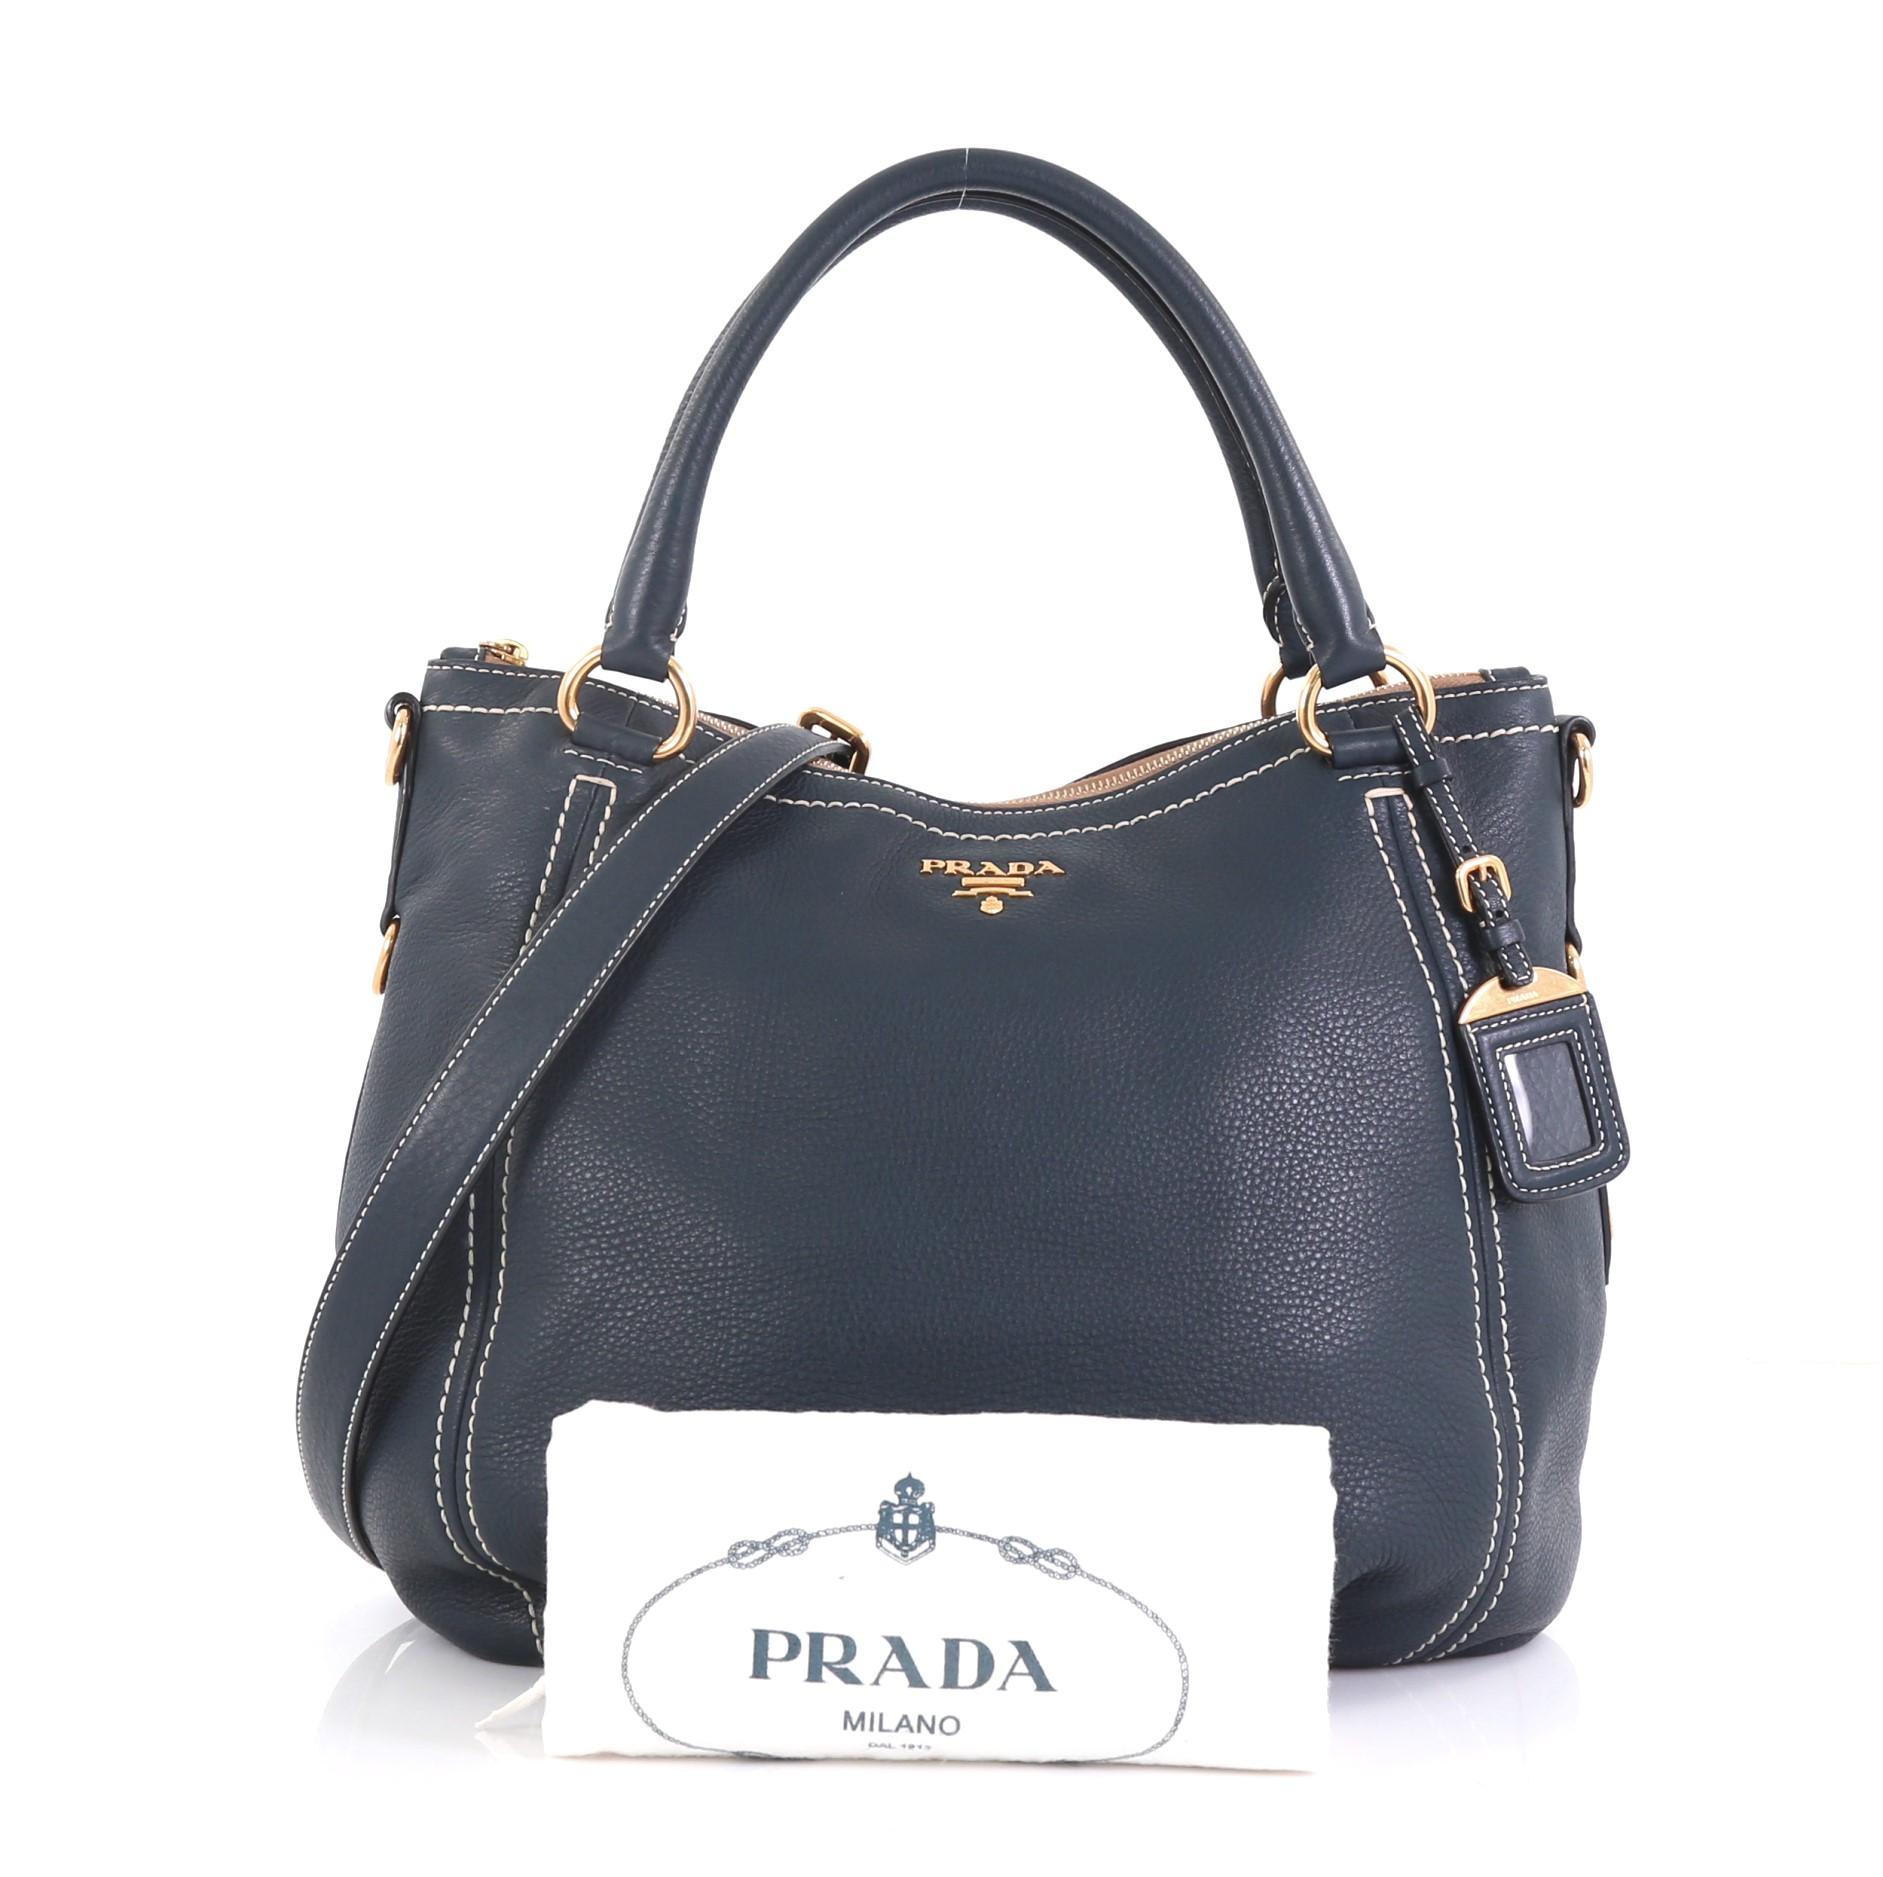 This Prada Convertible Satchel Vitello Daino Large, crafted from navy blue vitello daino leather, features dual rolled handles with rings, Prada logo at its center, and gold-tone hardware accents. Its zip closure opens to a beige fabric and blue